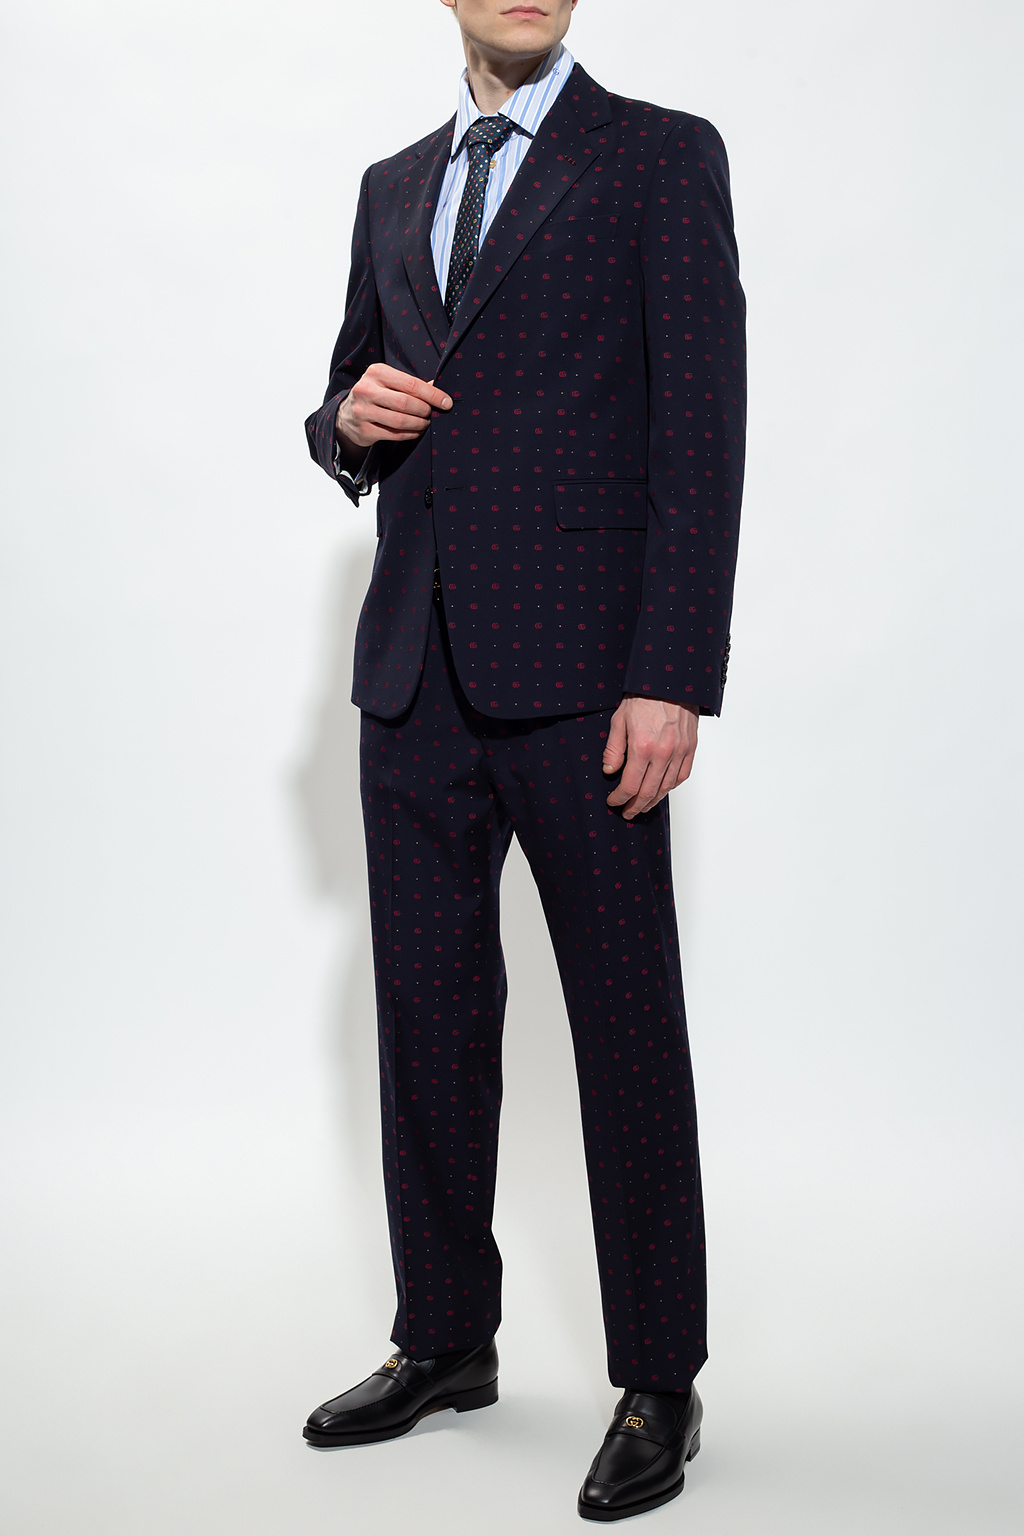 Gucci Monogram Suit - 12 For Sale on 1stDibs  gucci monogram suit price, suit  monogram, monogram suit jacket